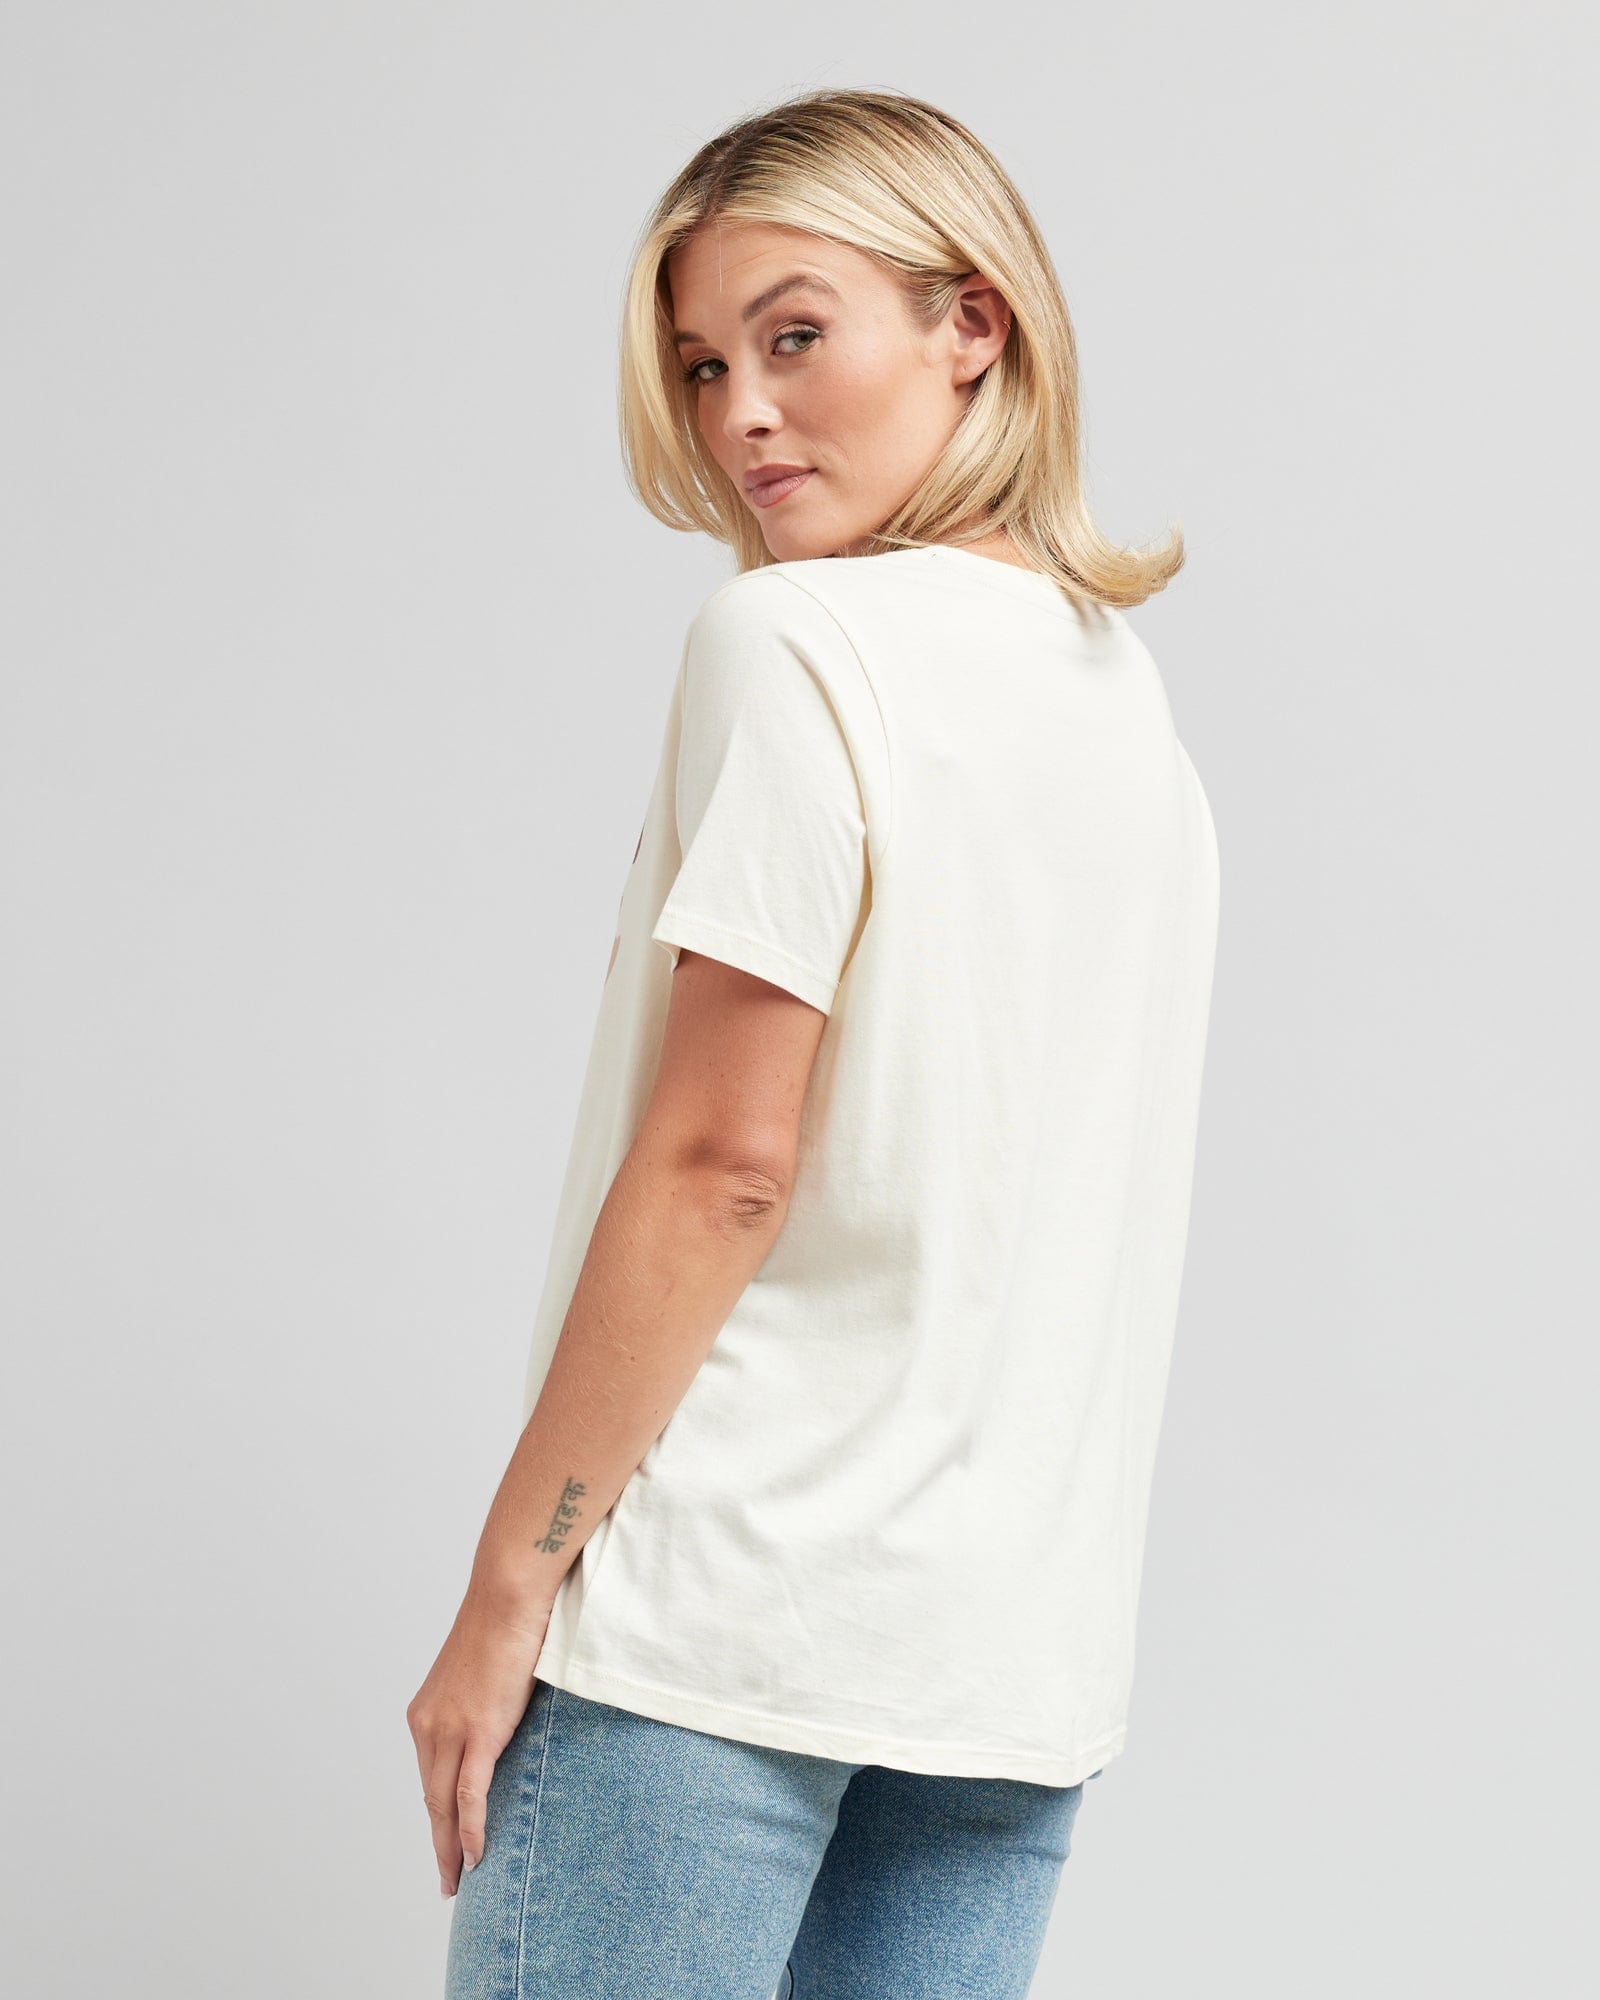 Woman in a short sleeve, white graphic tee that says "Keep Going"